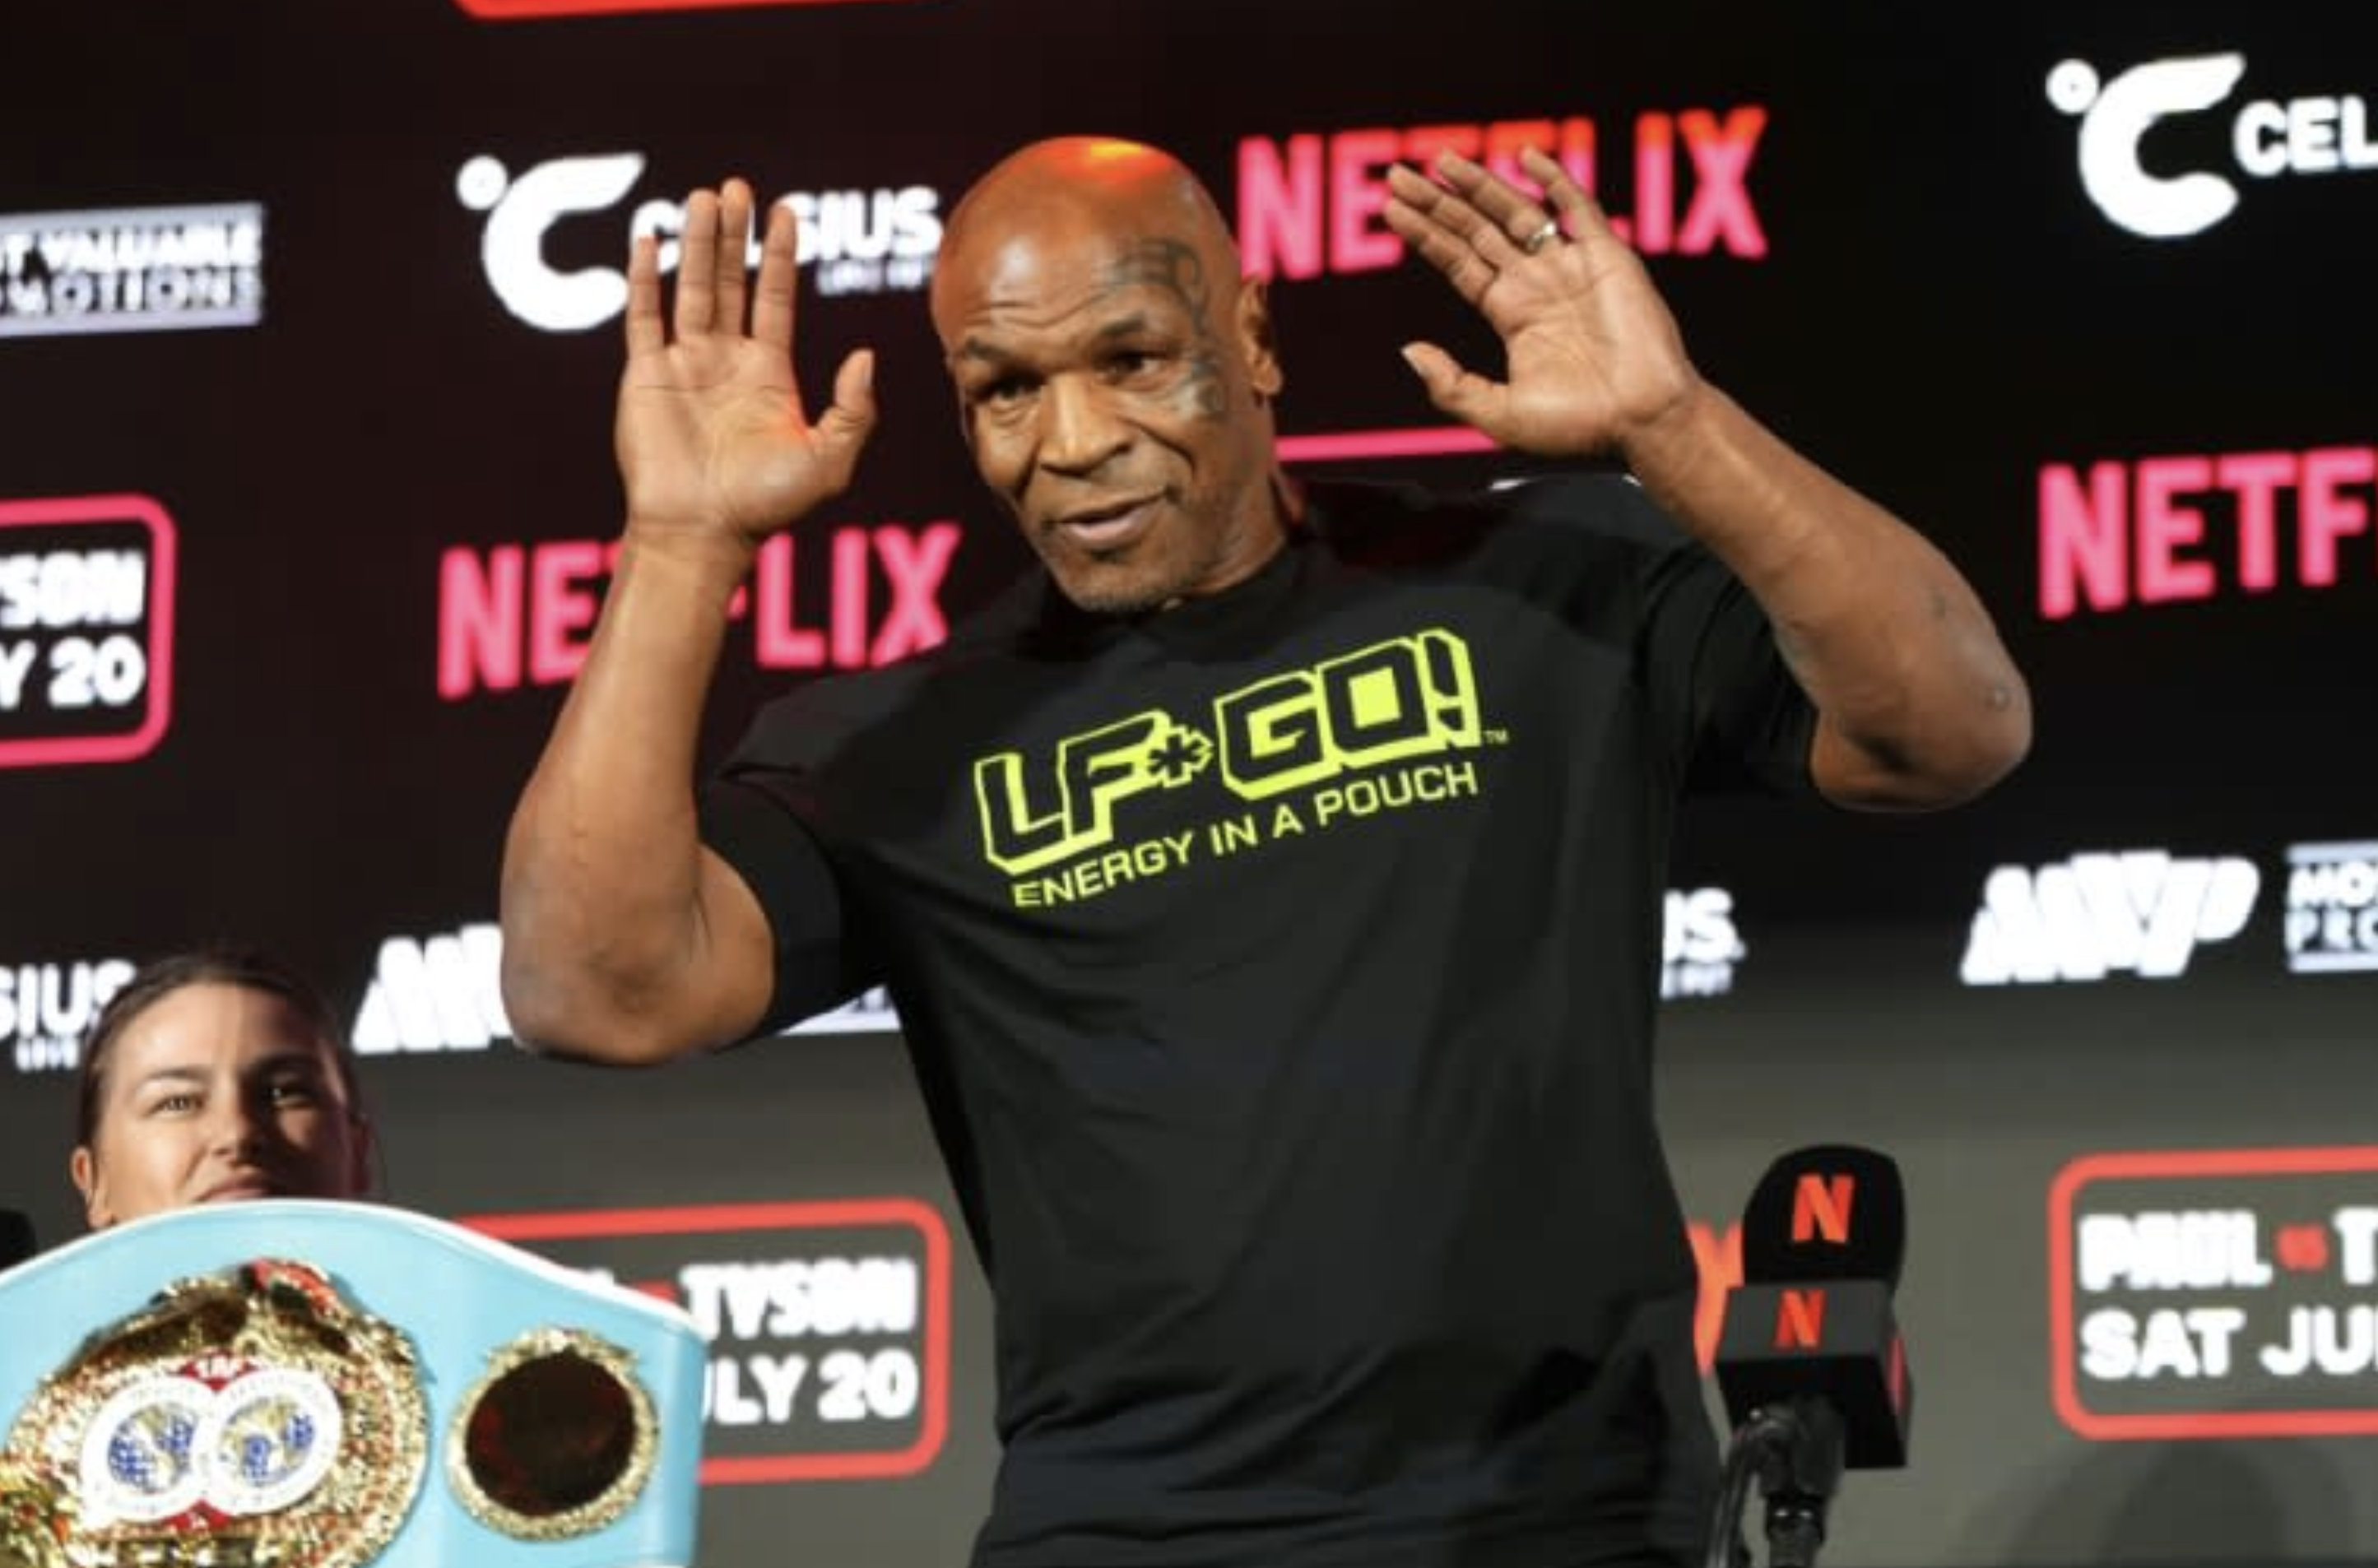 Tyson says he feels '100%' after plane health scare